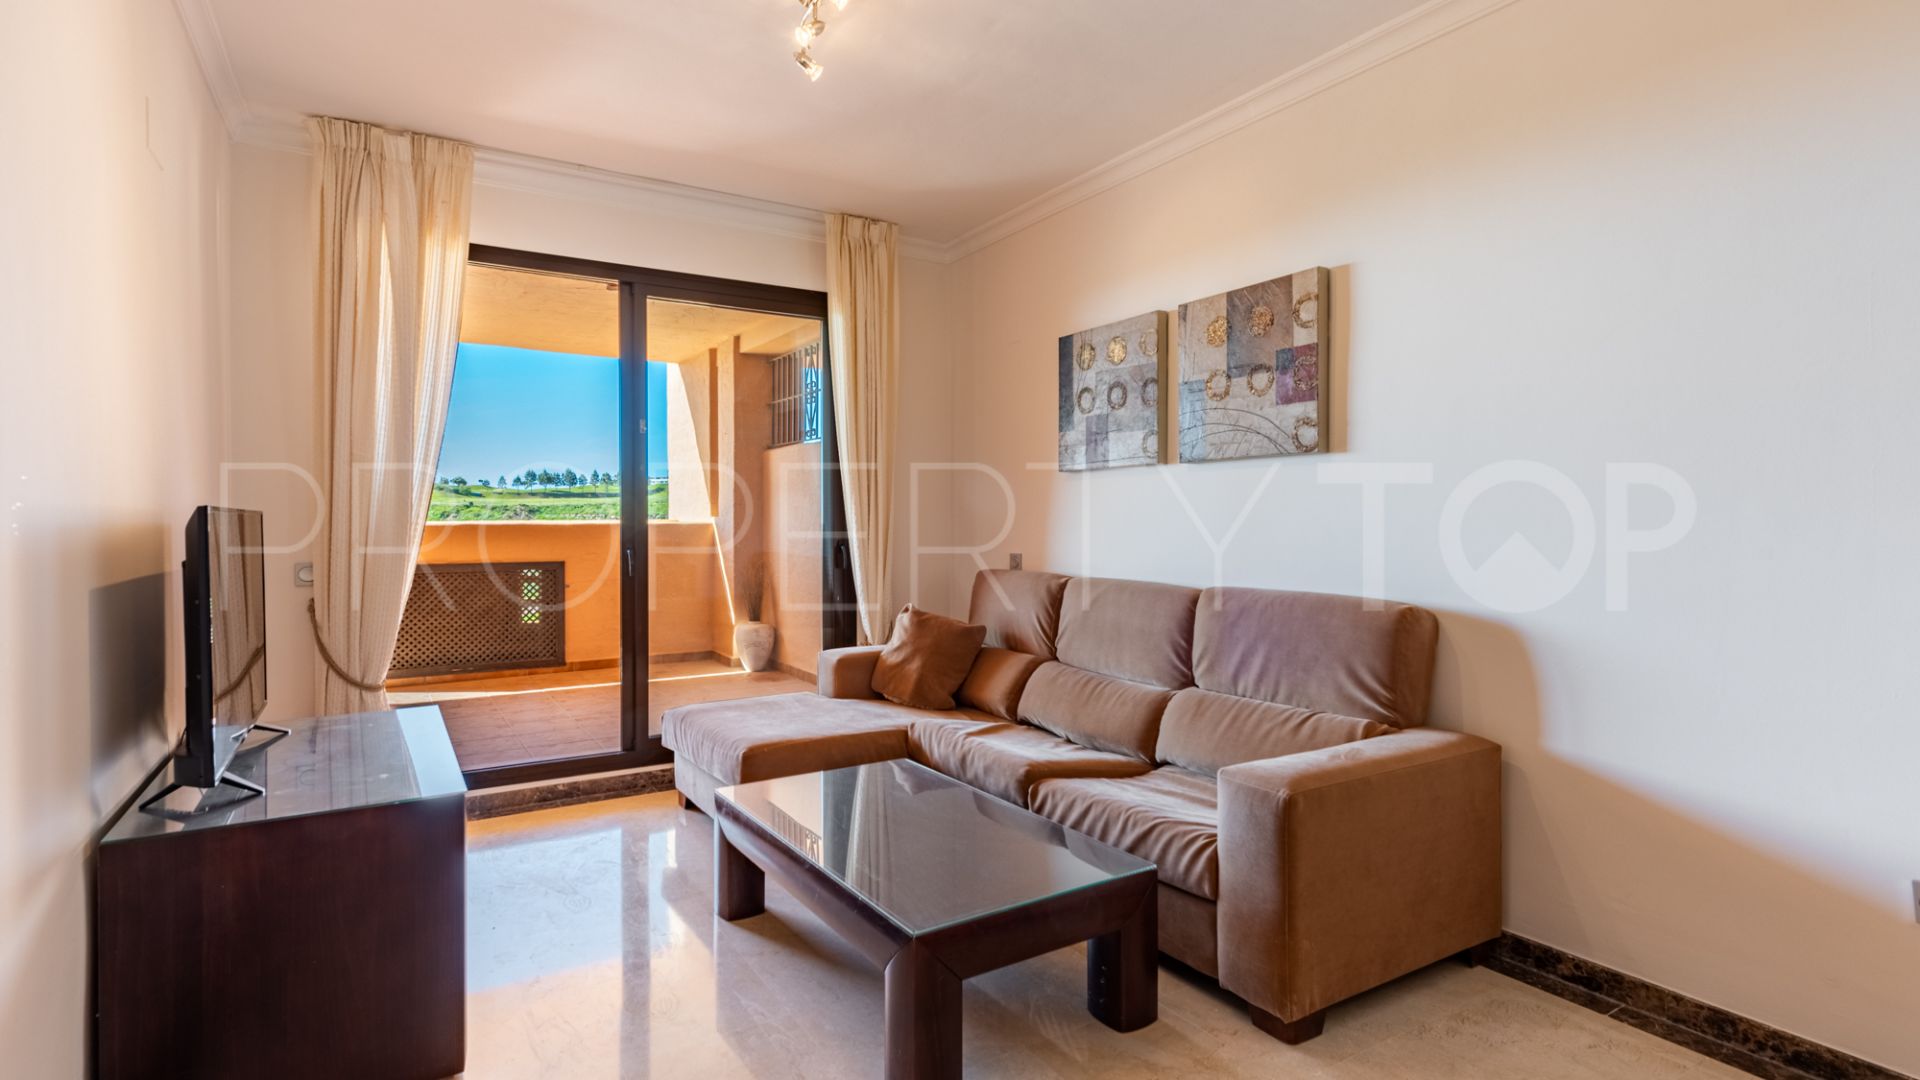 2 bedrooms apartment in Calanova Golf for sale